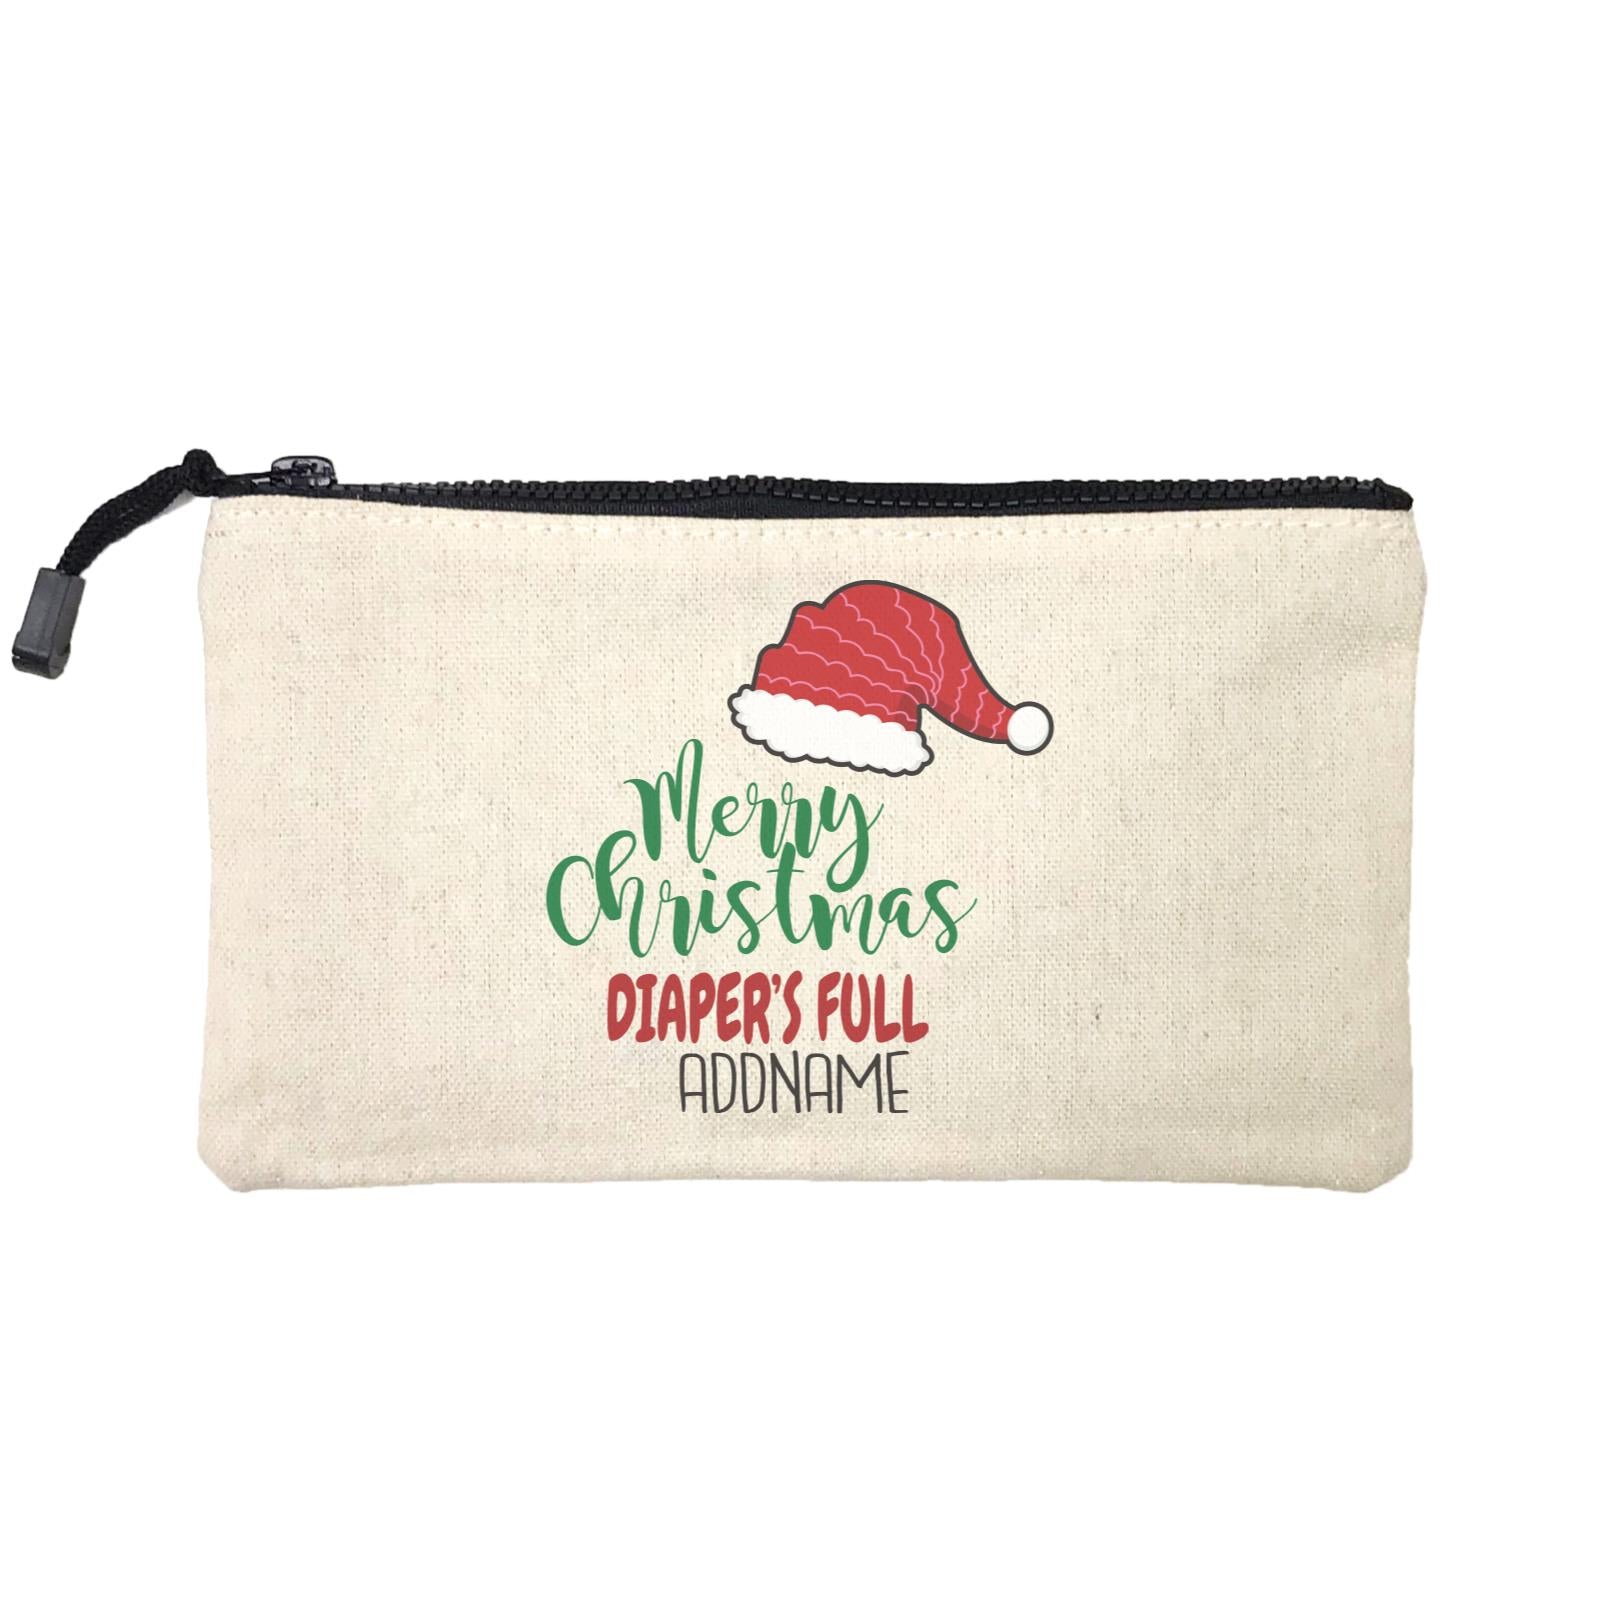 Xmas Merry Christmas Diaper's Full Mini Accessories Stationery Pouch